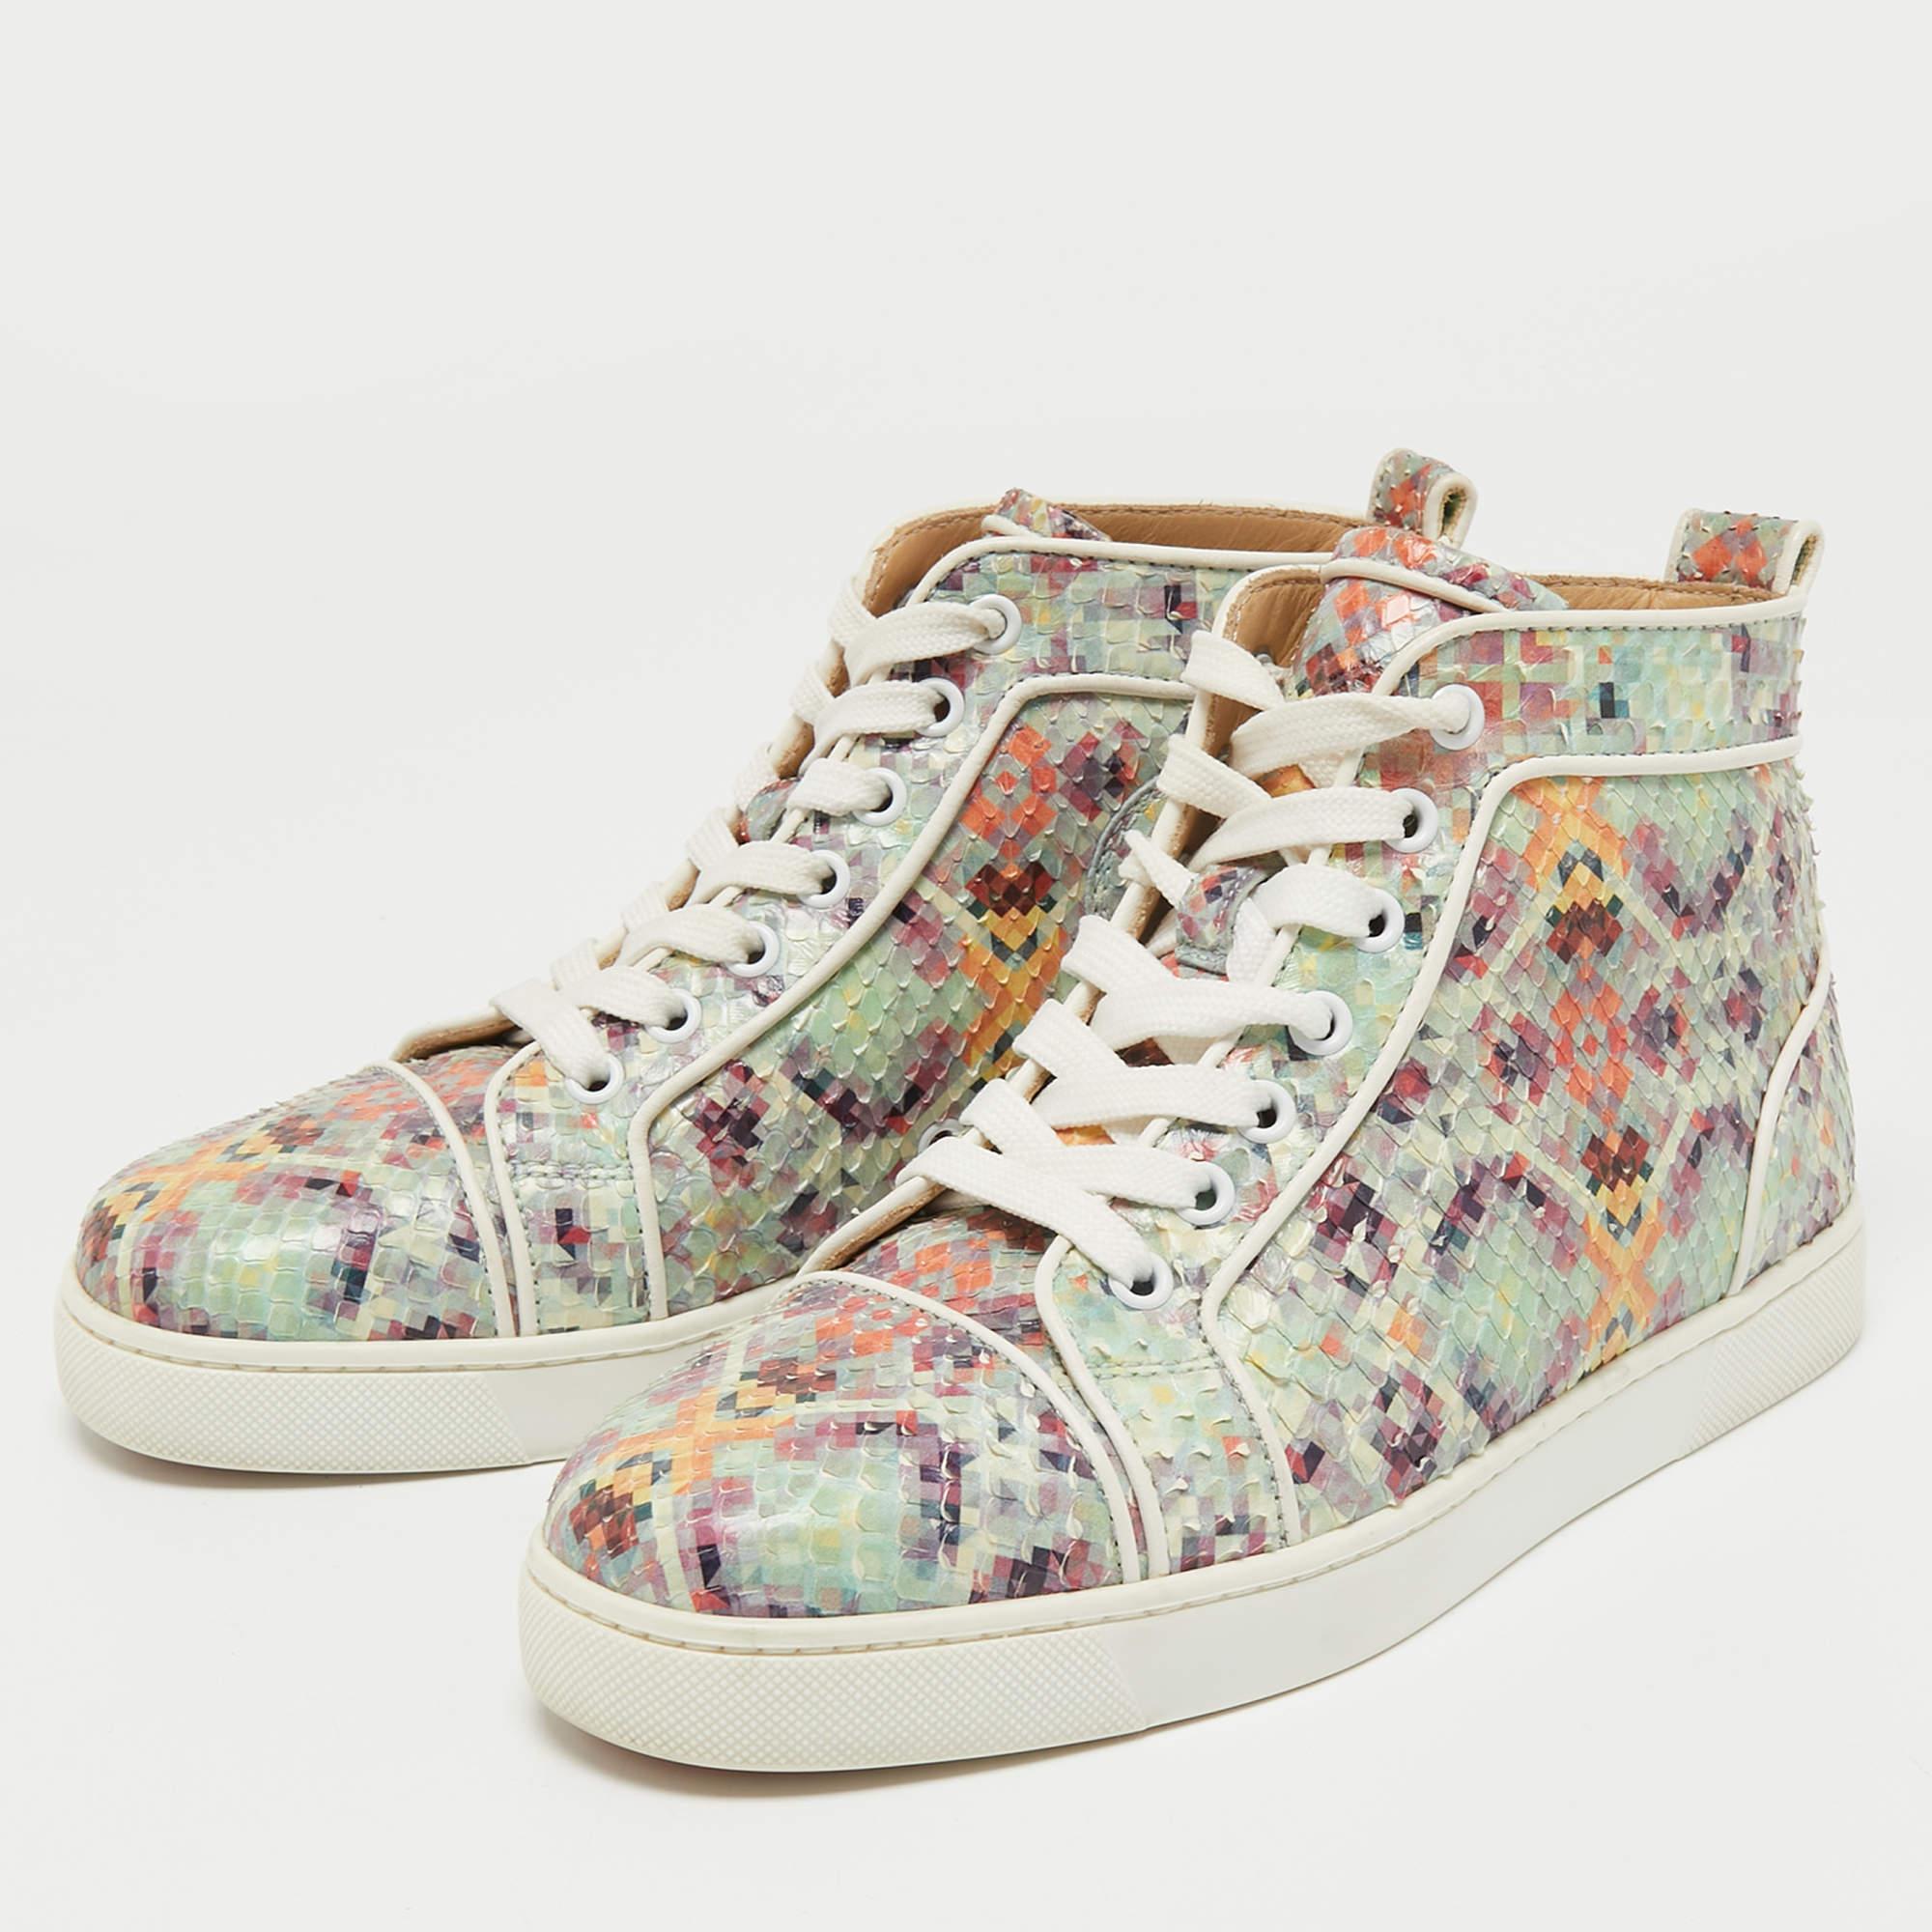 Beige Christian Louboutin Printed Python Louis Orlato High Top Sneakers Size 37 For Sale